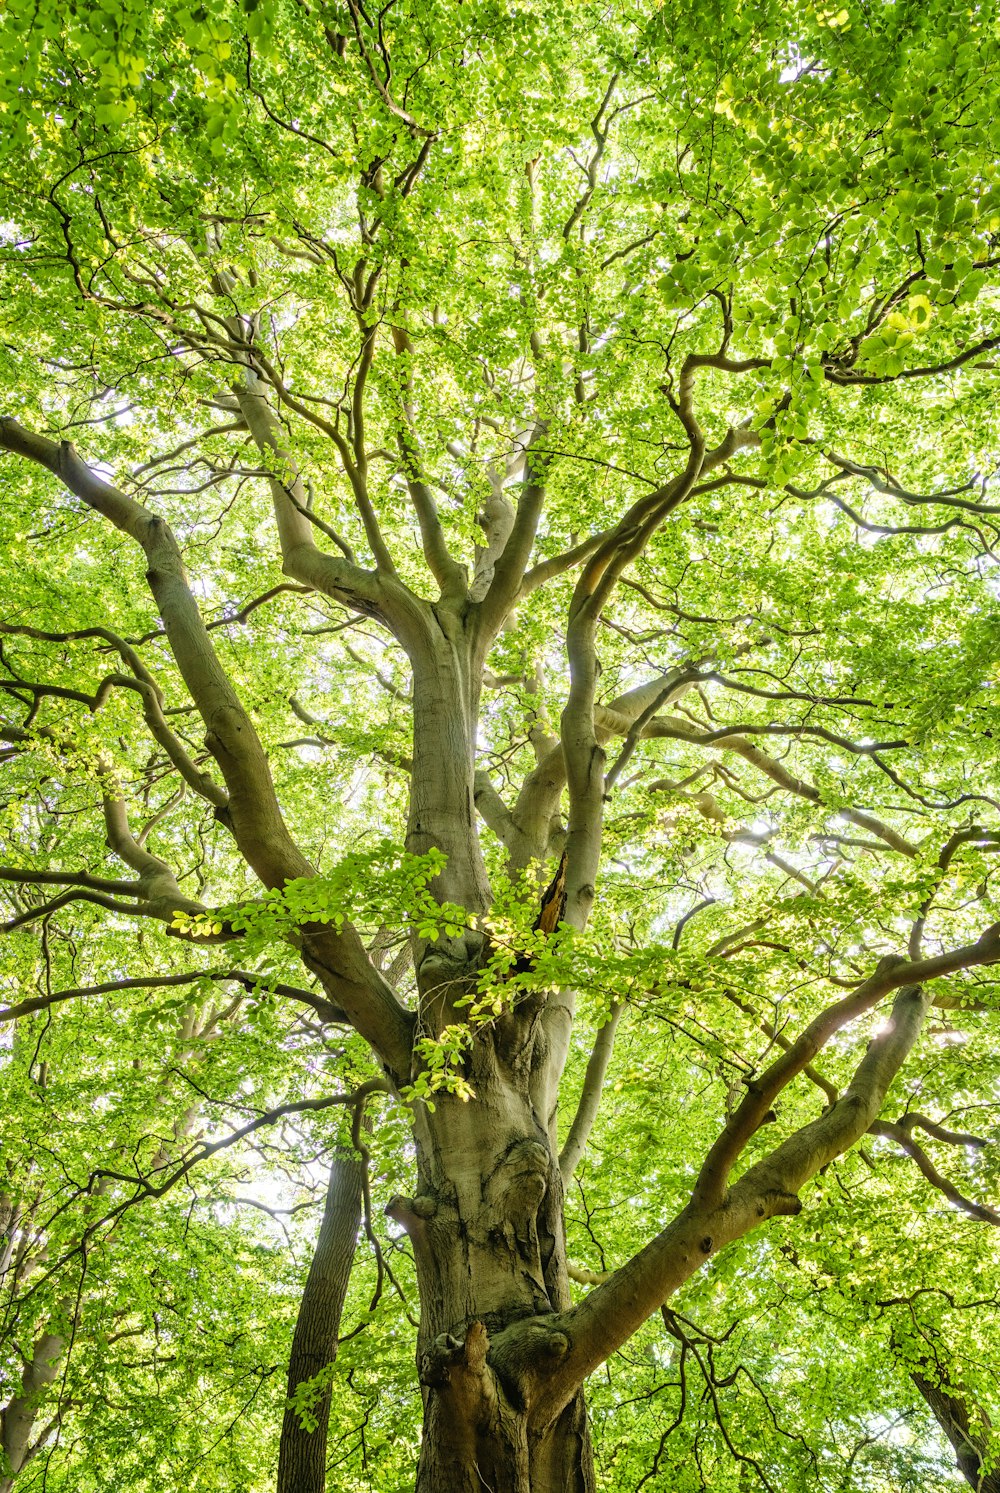 Why You Should Hug Trees: A blog post around the benefits of hugging trees.